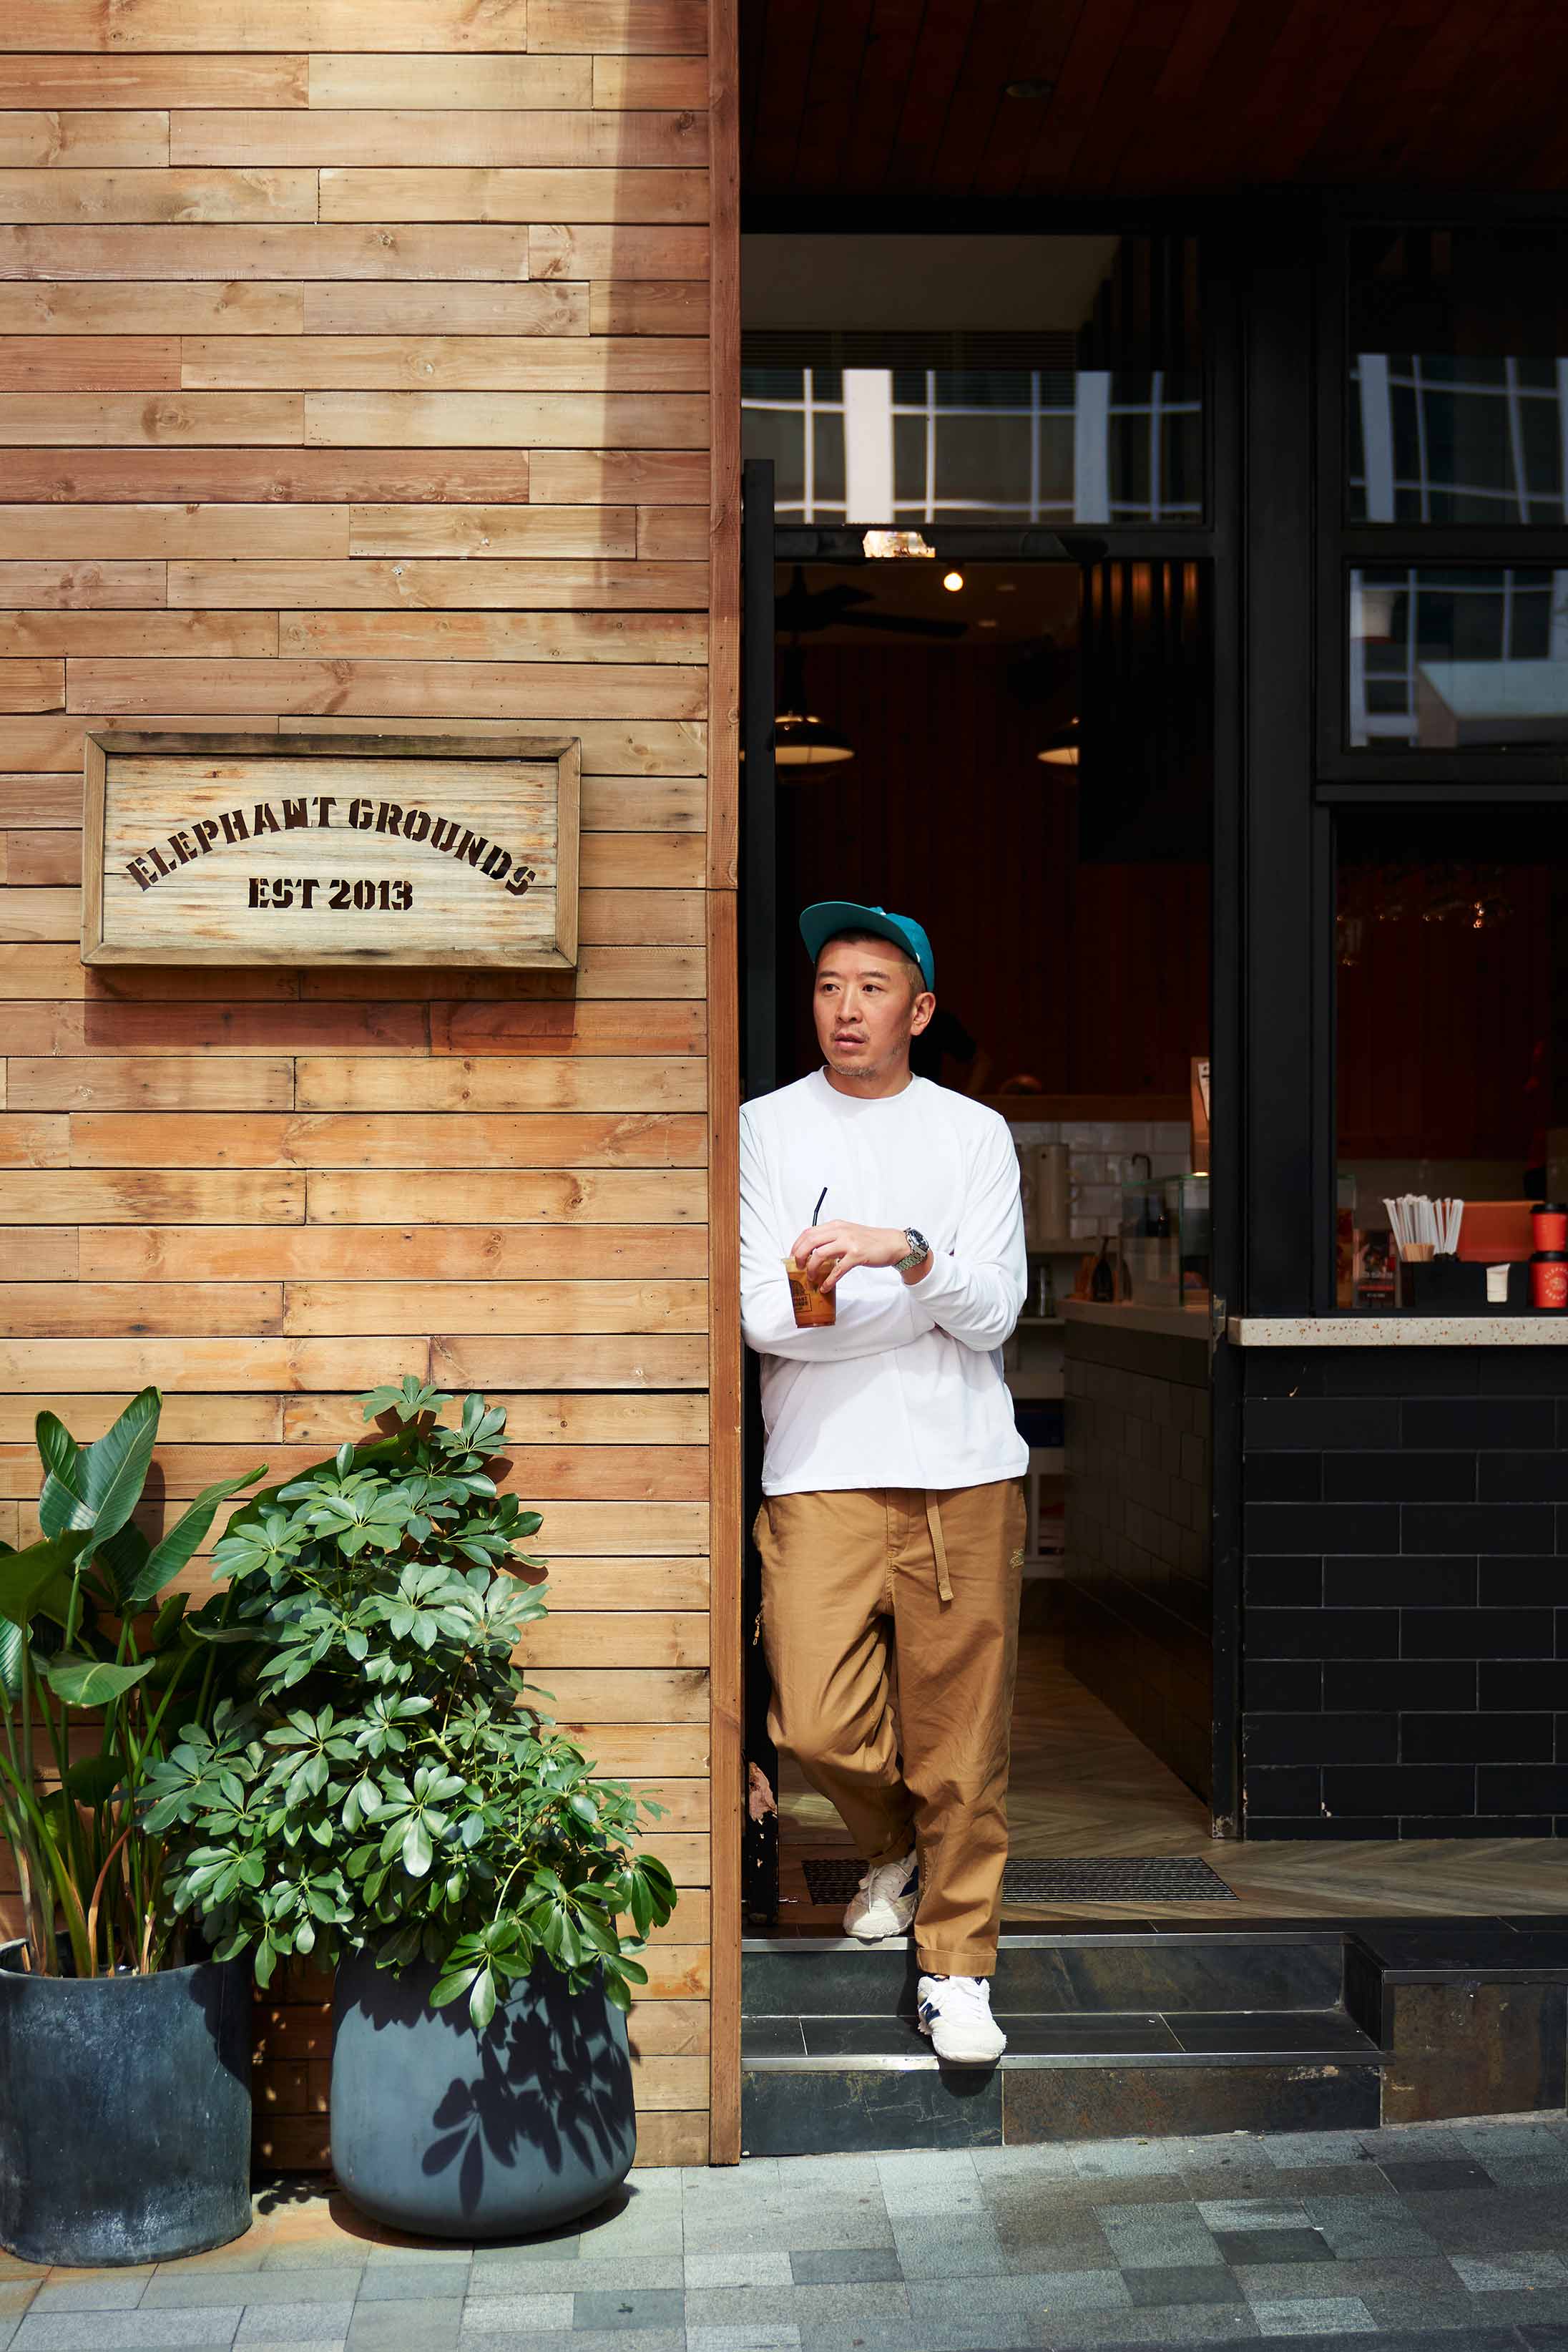 Gerald Li getting his morning cup of coffee at his Elephant Grounds Starstreet shop